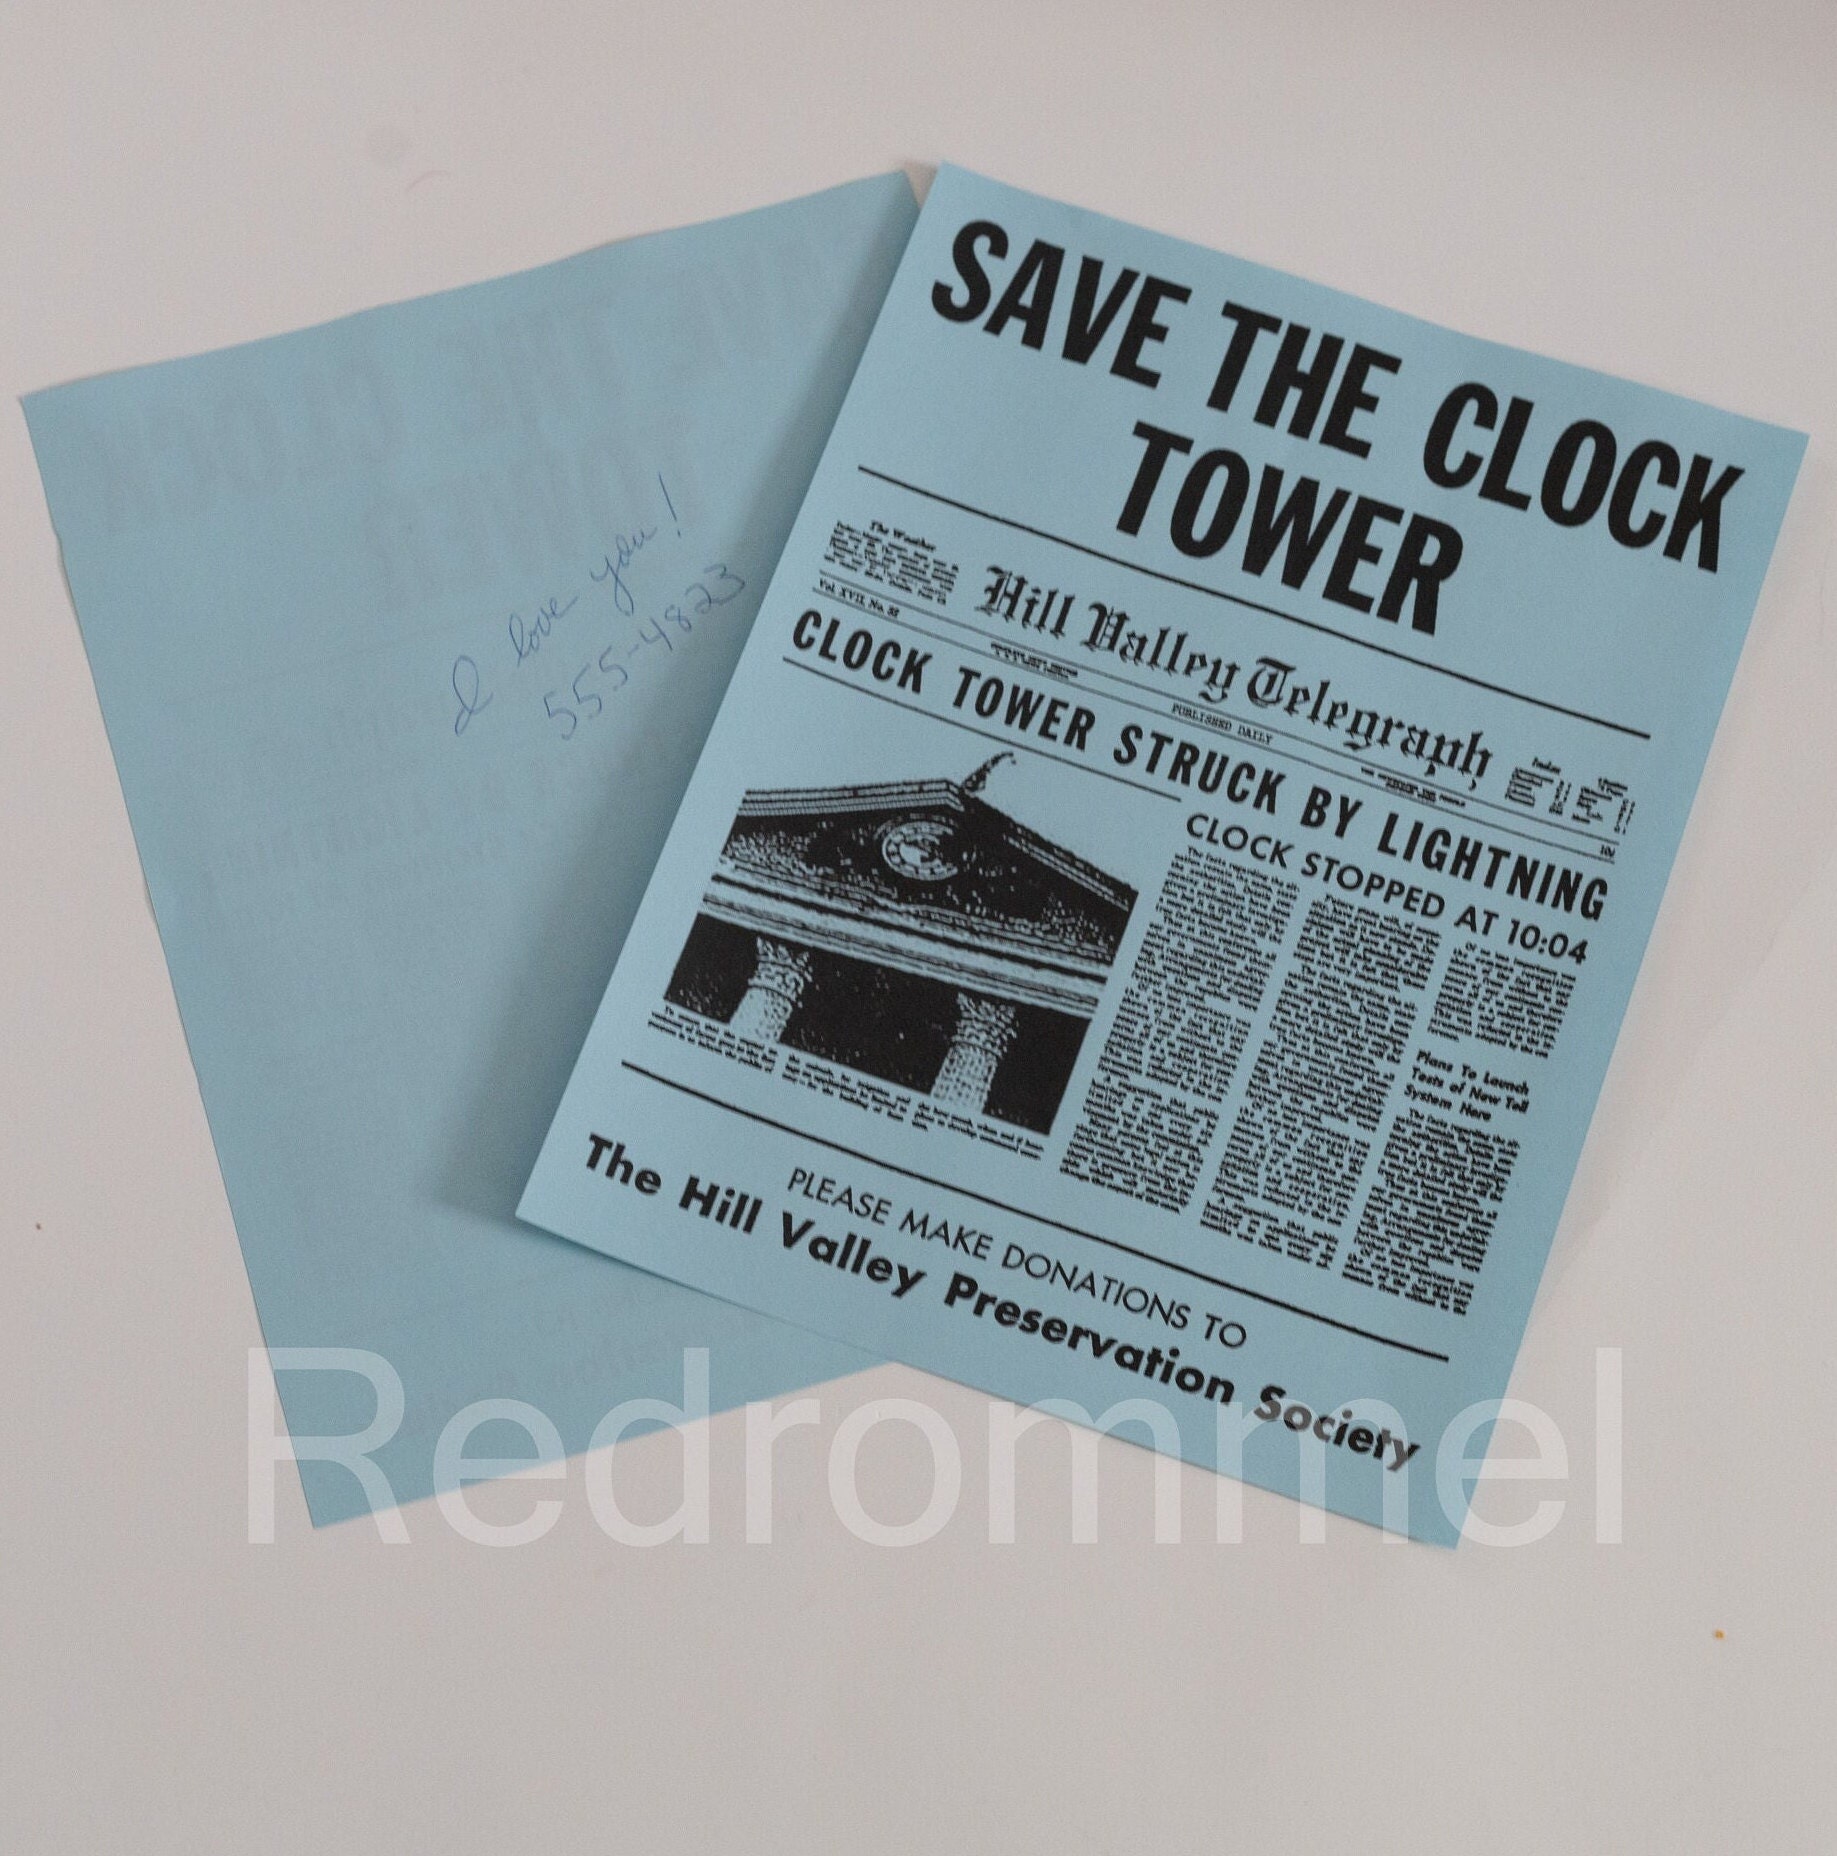 BTTF Back to the Future Save the Clock Tower Flyer - Etsy 日本